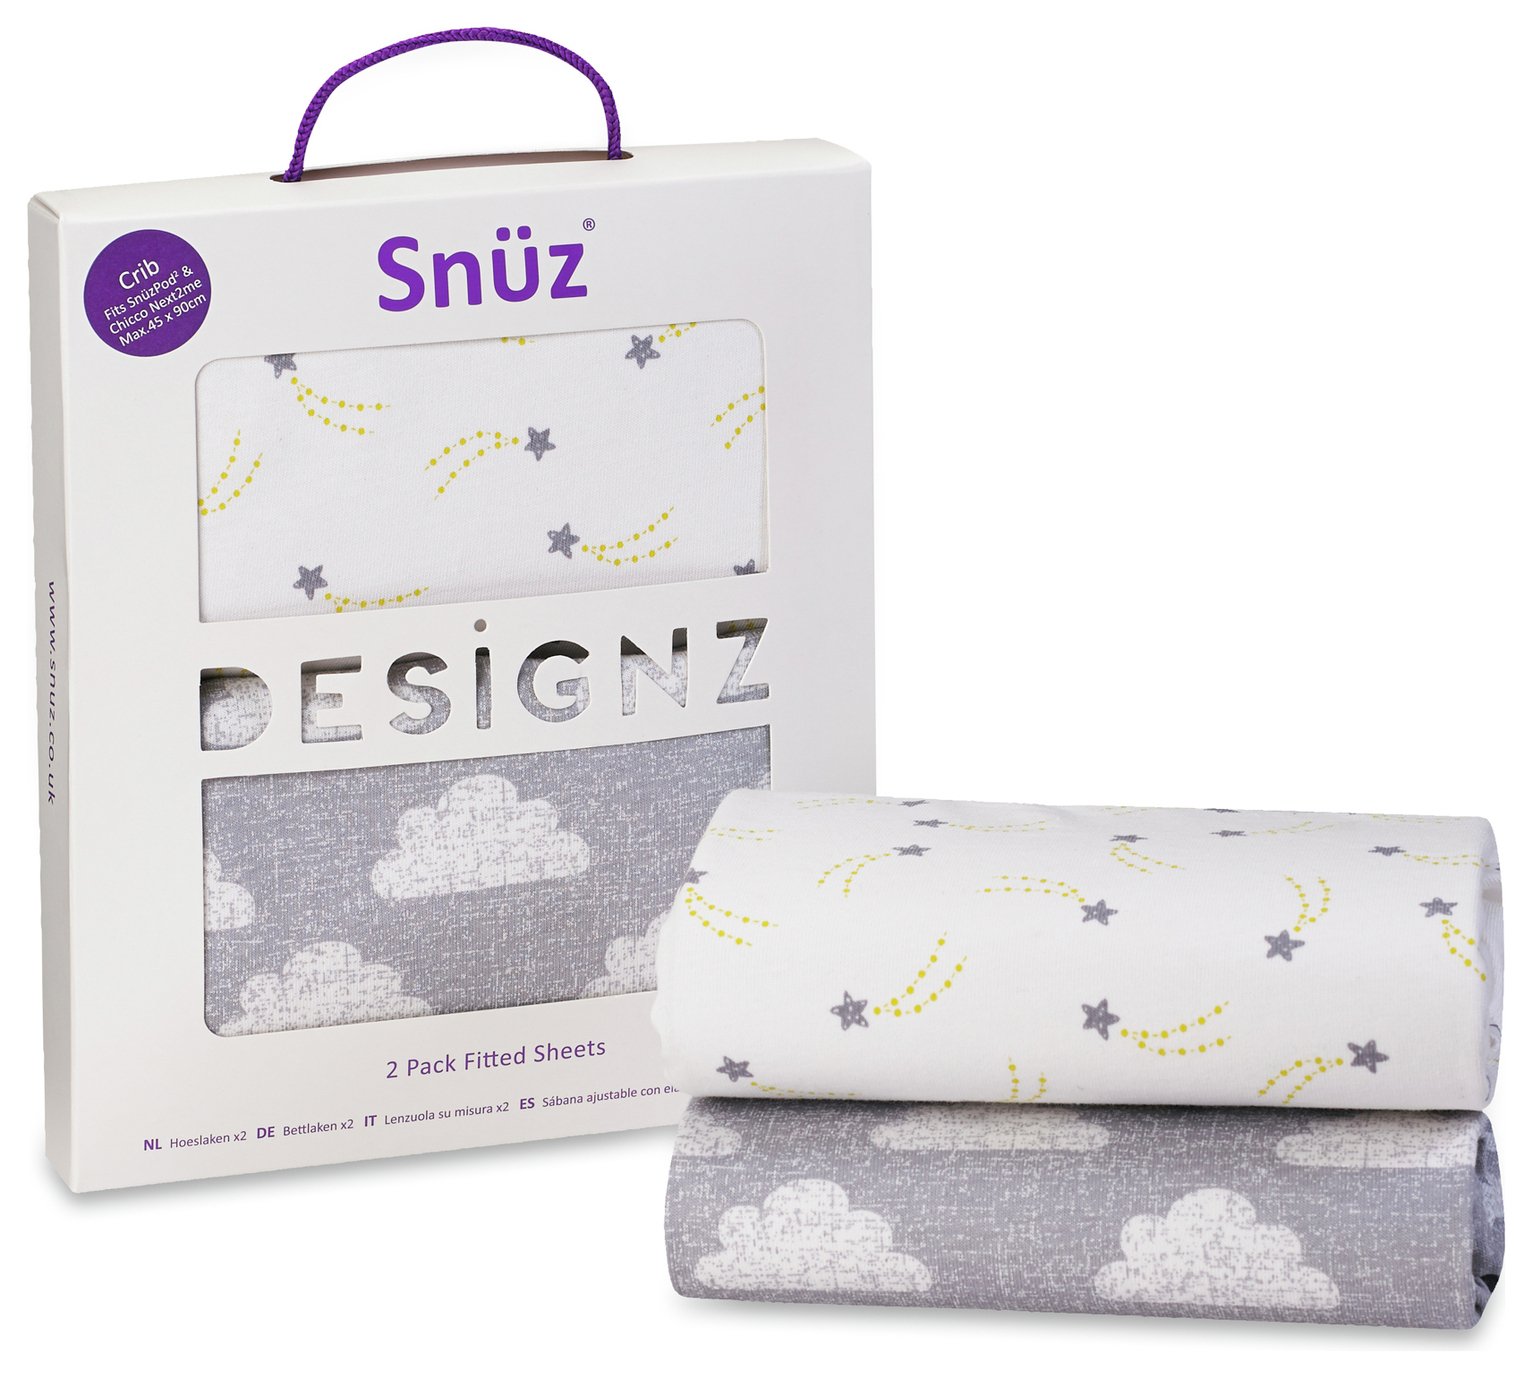 Snuz Crib 2 Pack of Fitted Sheets - Cloud 9